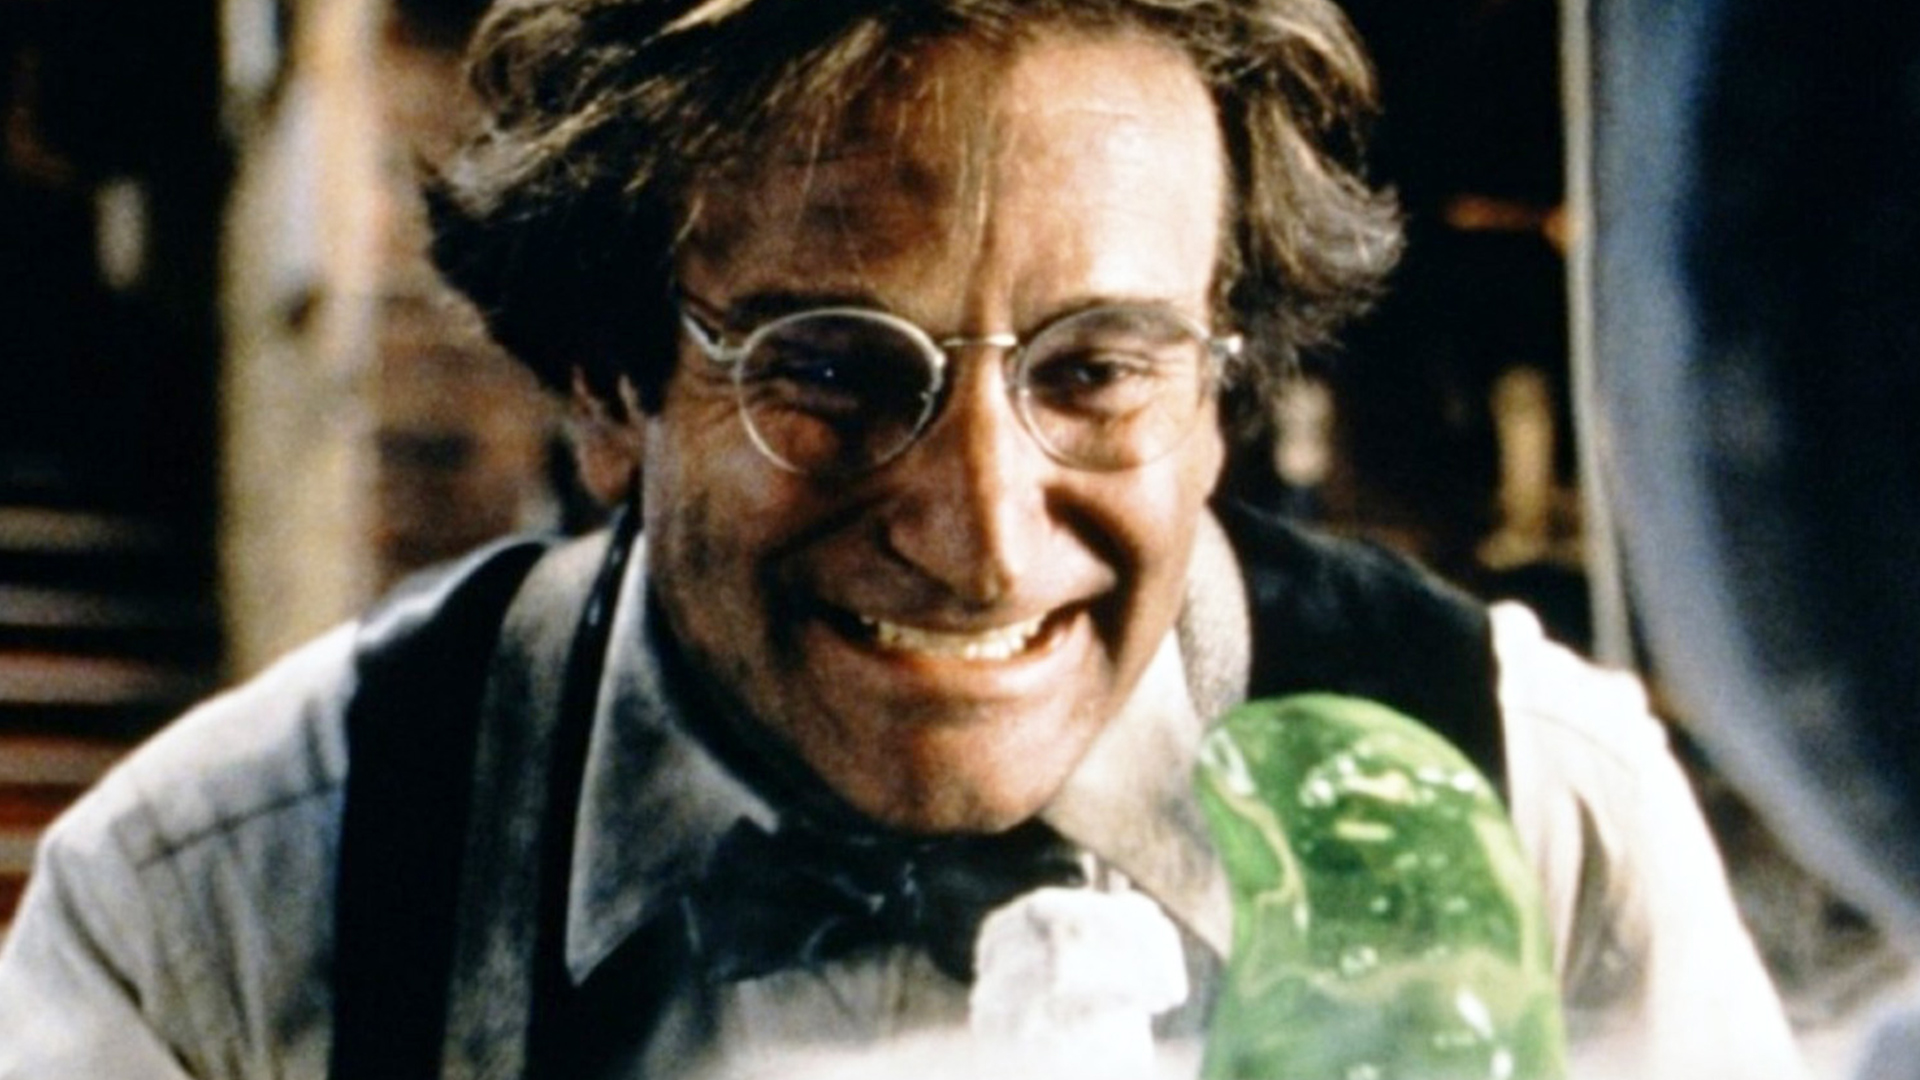 A scene from Flubber